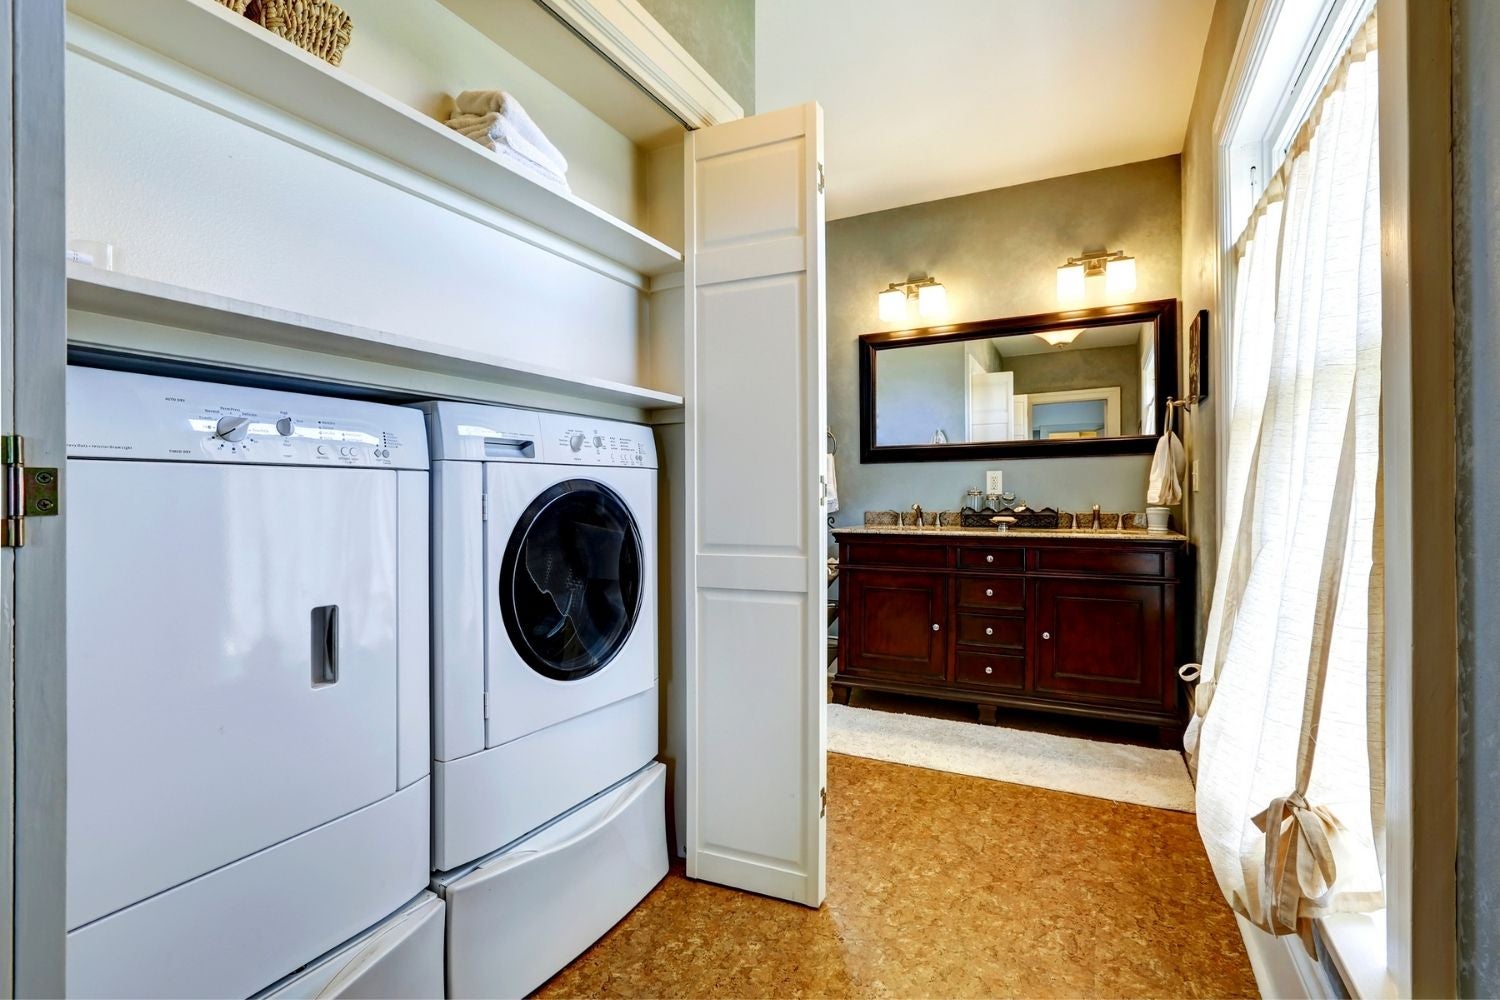 How Long Should A Washer And Dryer Last